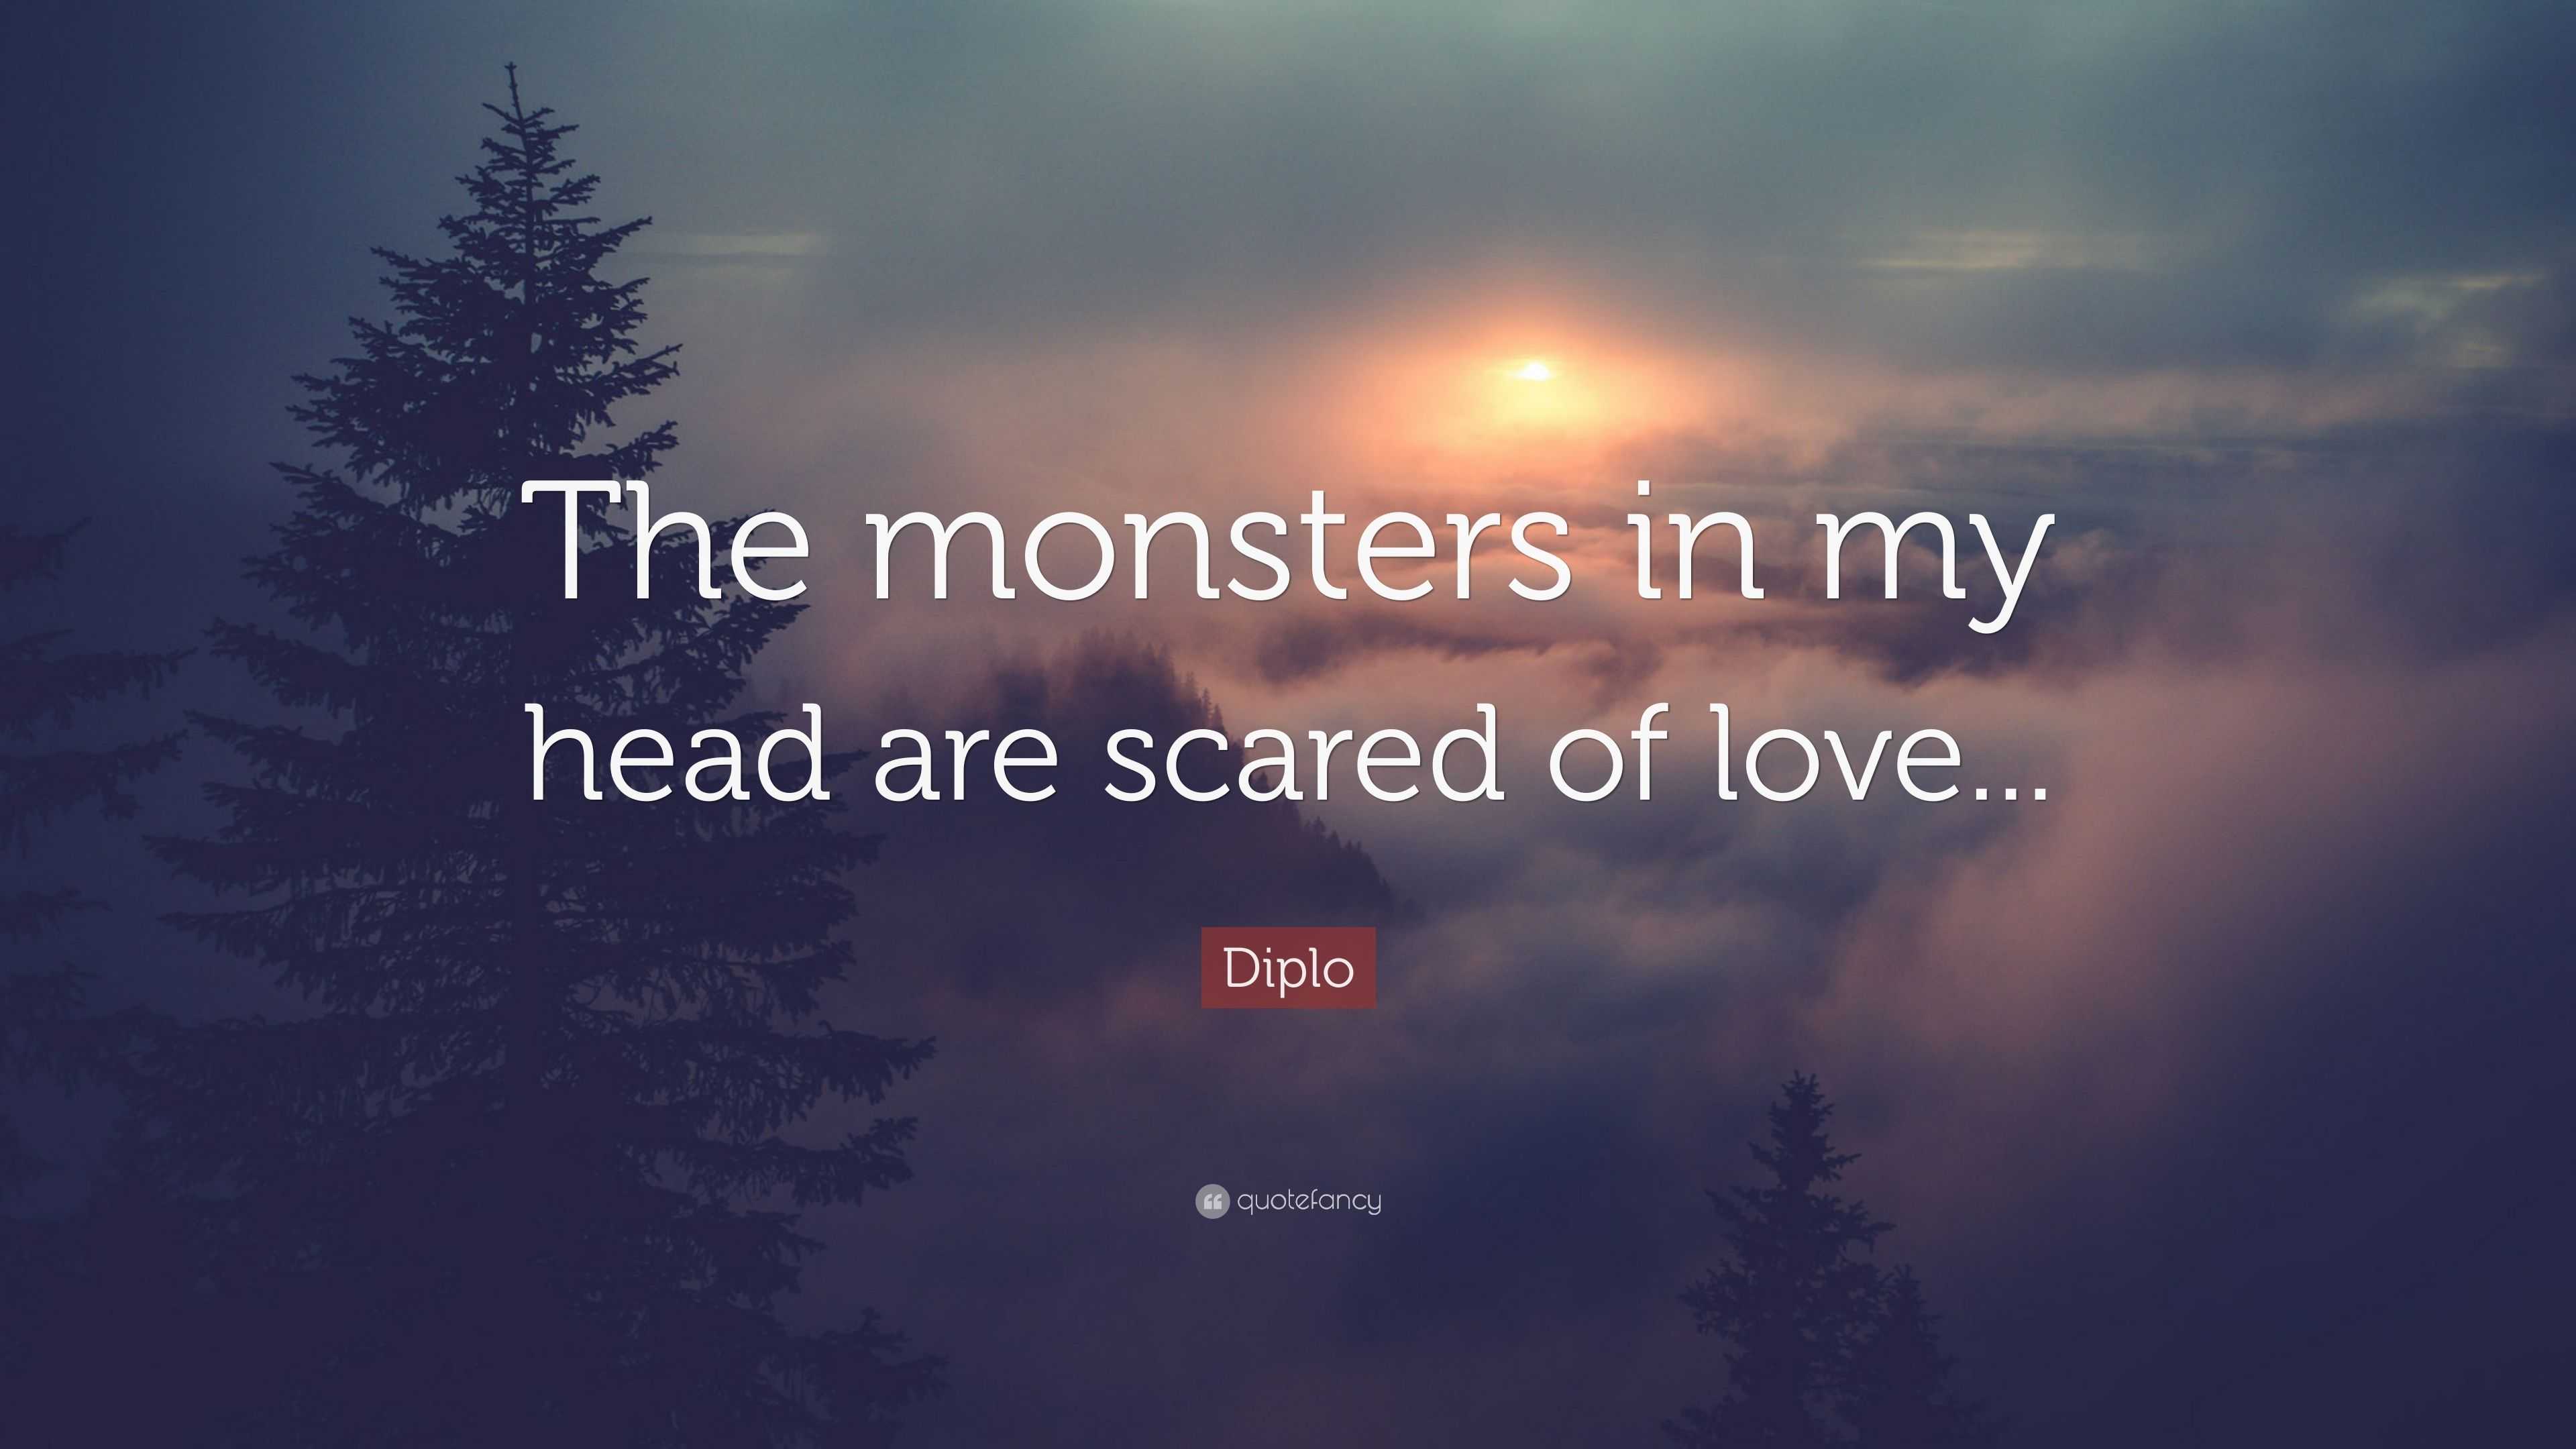 Diplo Quote: “The monsters in my head are scared of love...”